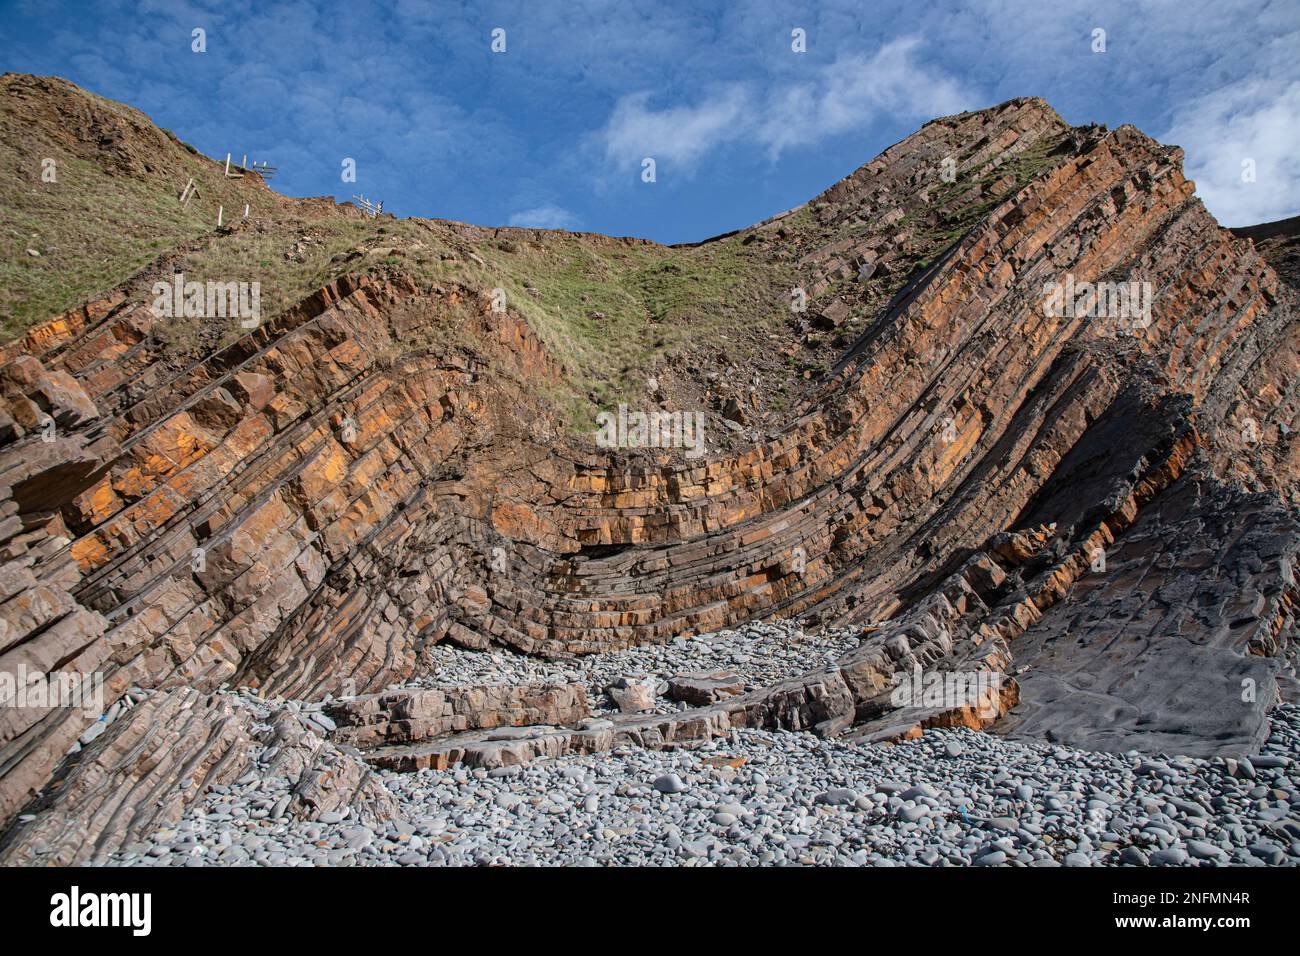 Rock Strata, Sandymouth Bay, Cornwall, UK. Lower Carboniferous, Bude Sandstones and Siltstones. Stock Photo